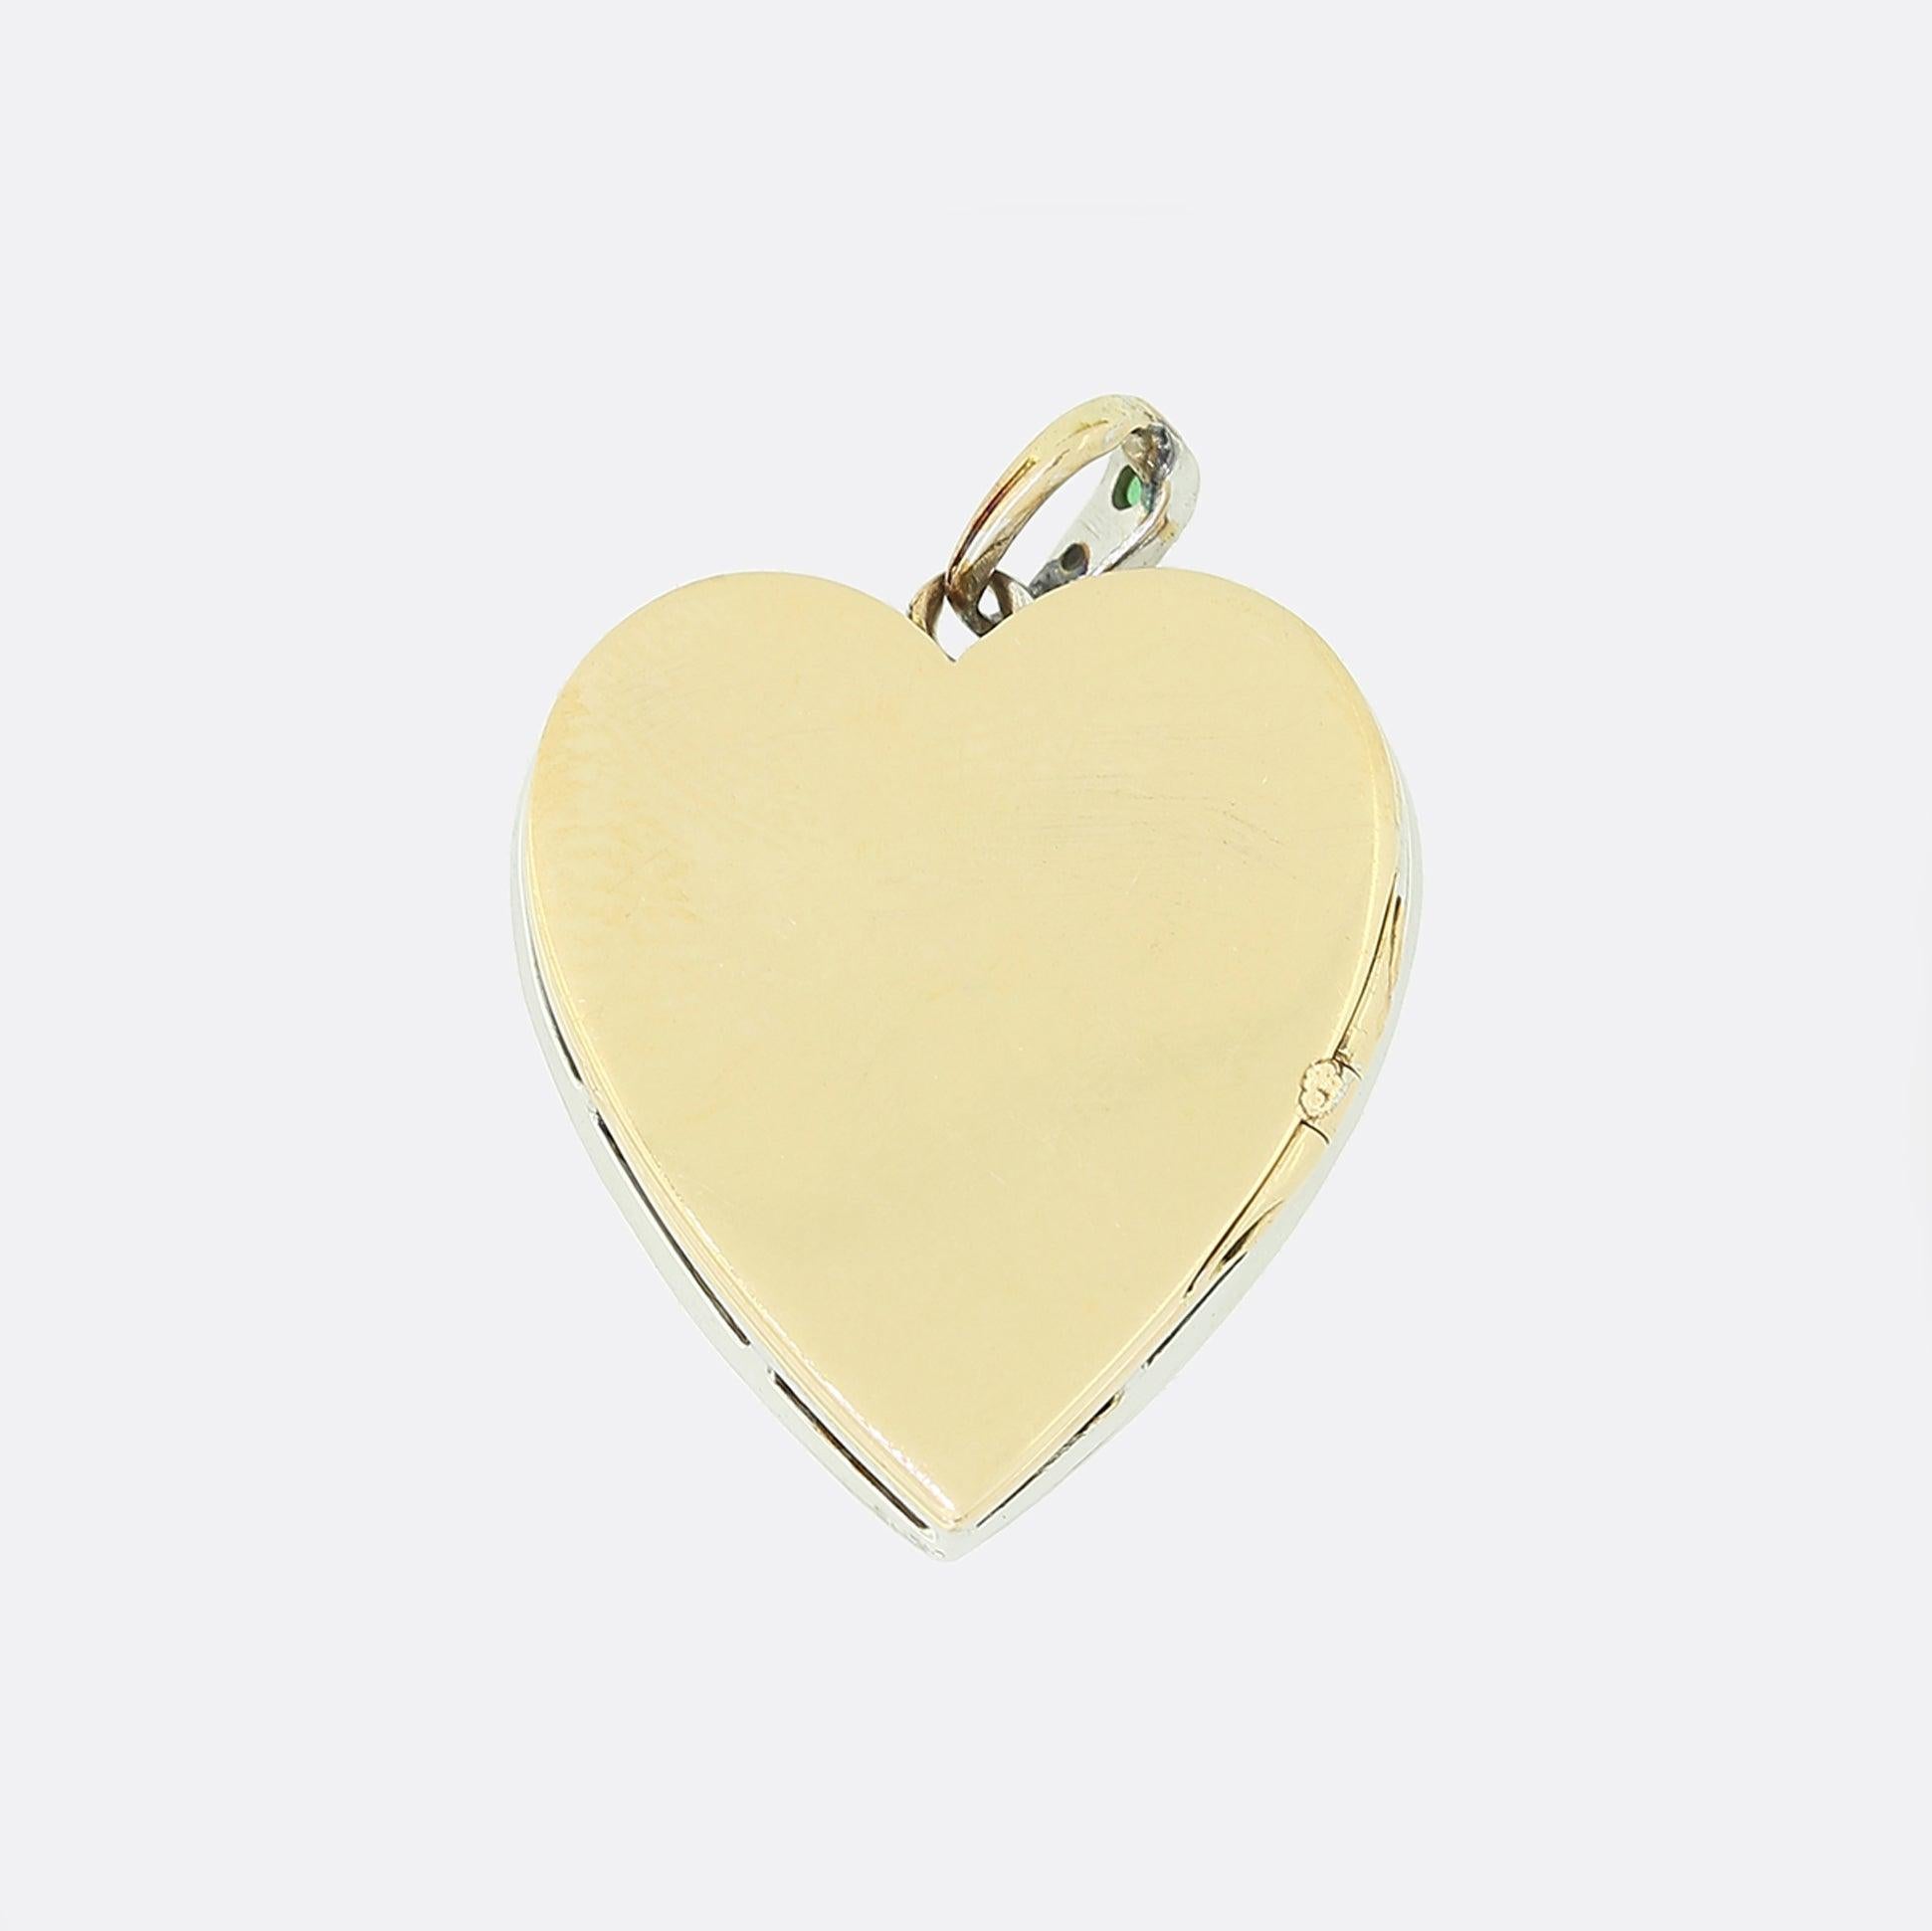 This is a lovely 18ct yellow gold emerald and diamond heart pendant. The pendant features a central square cut emerald which is surrounded by an array of old cut diamonds; all of which are set in white gold. The rich green of the emerald is highly